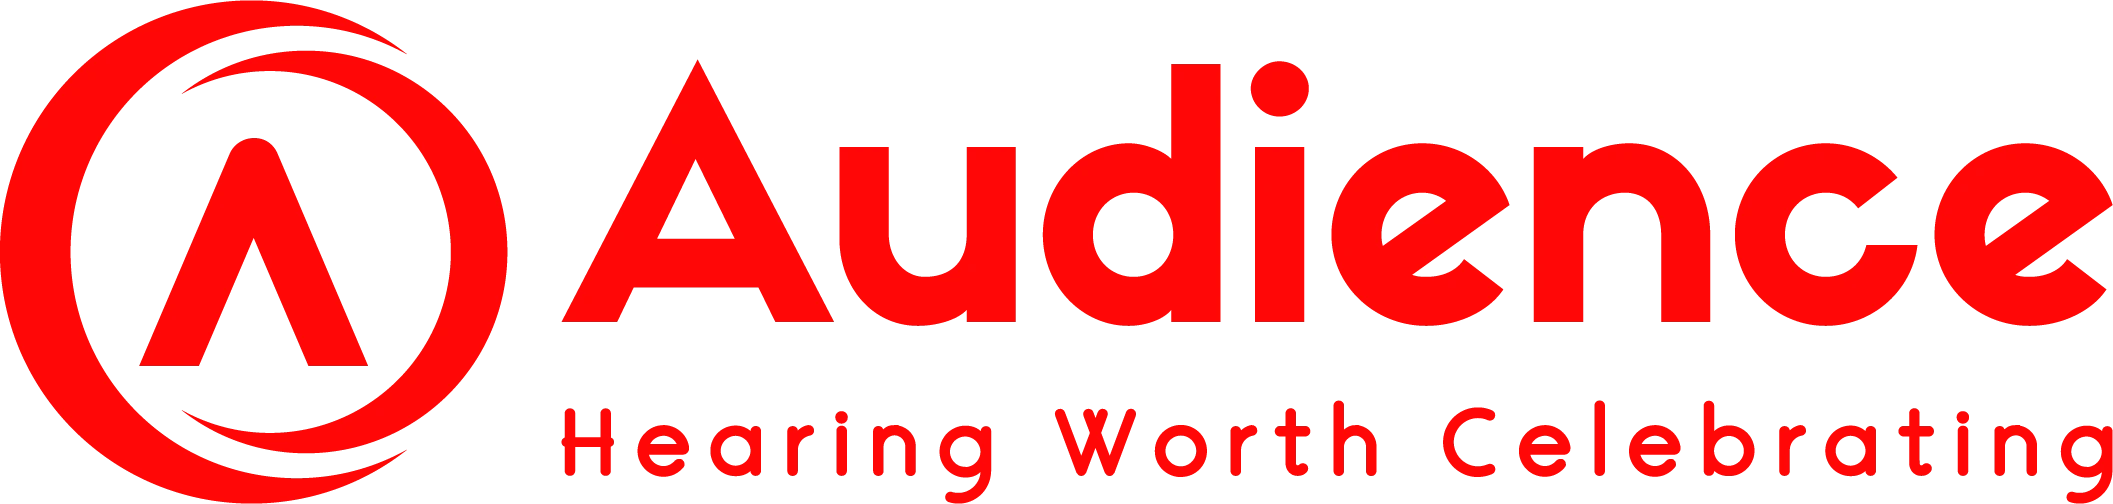 Logo of Audience Hearing, a premier hearing clinic specializing in hearing aids, assistive listening devices, custom ear plugs, and comprehensive auditory services including hearing tests, pre-employment screening, tinnitus solutions, and hearing screenings.